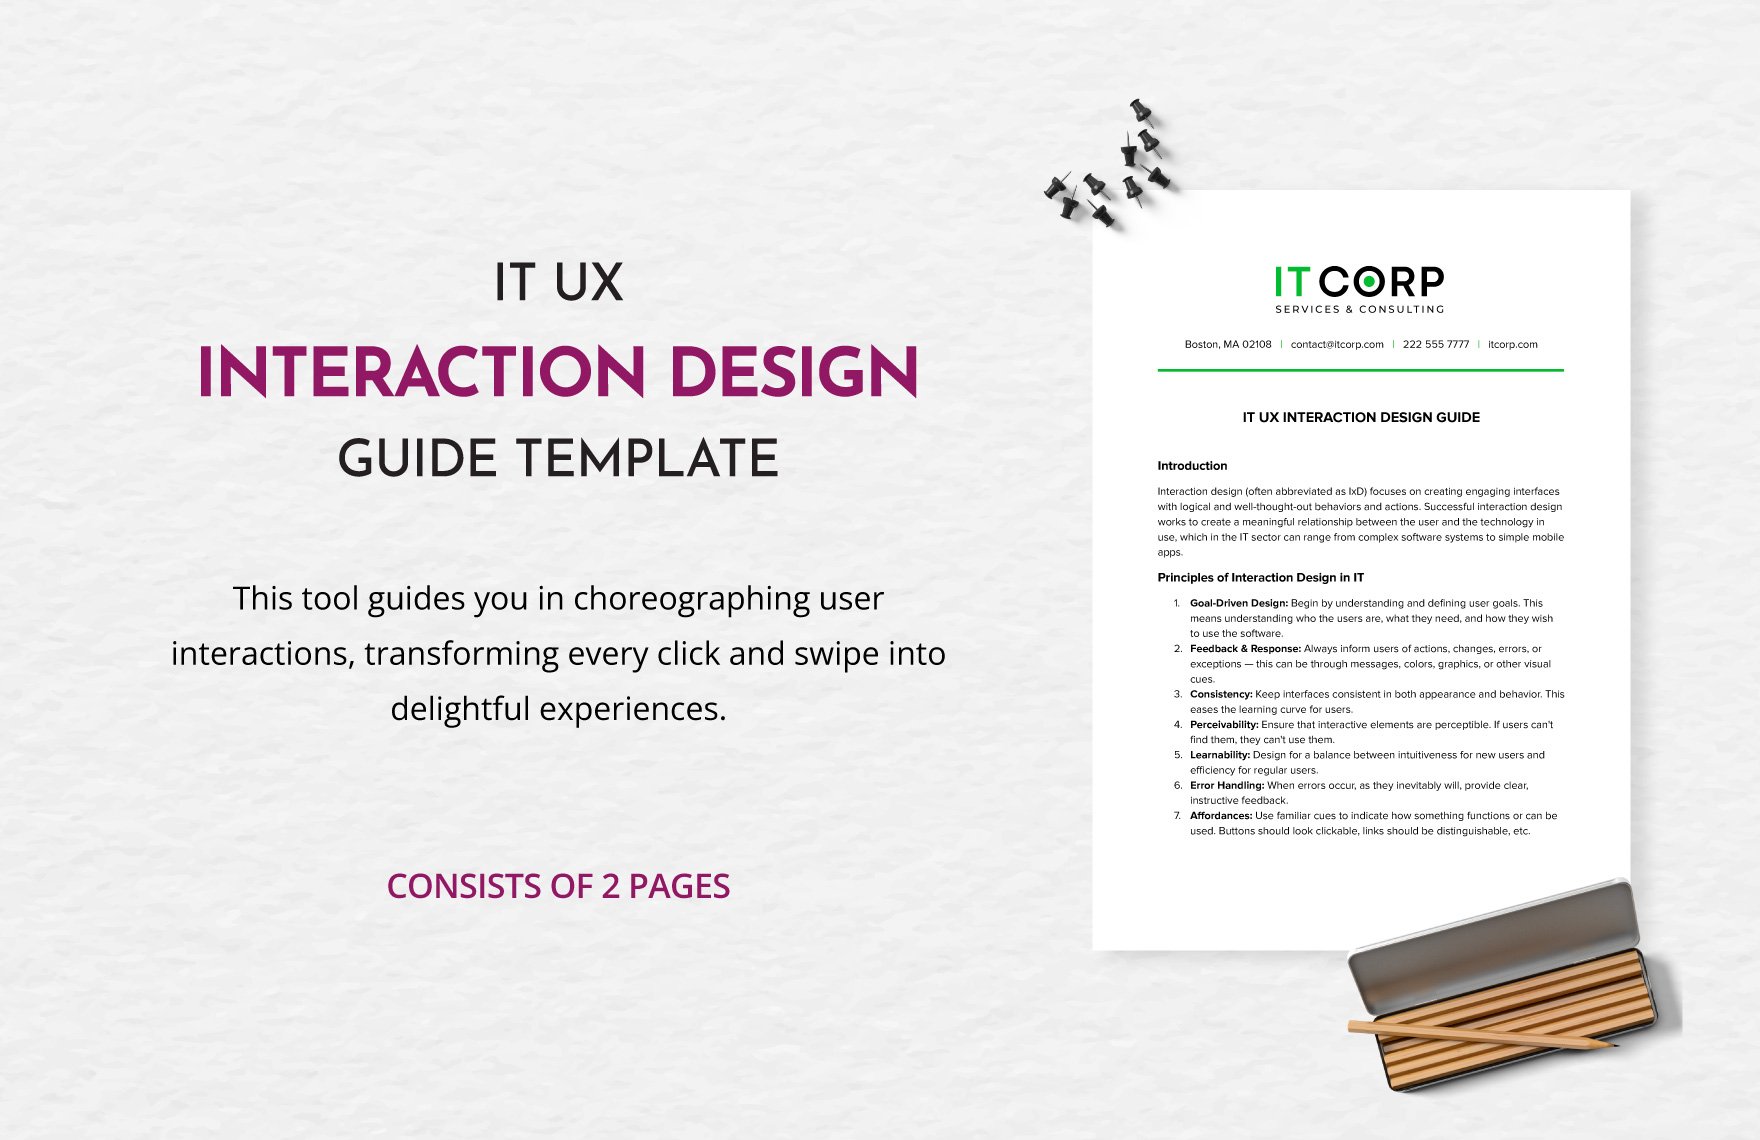 IT UX Interaction Design Guide Template